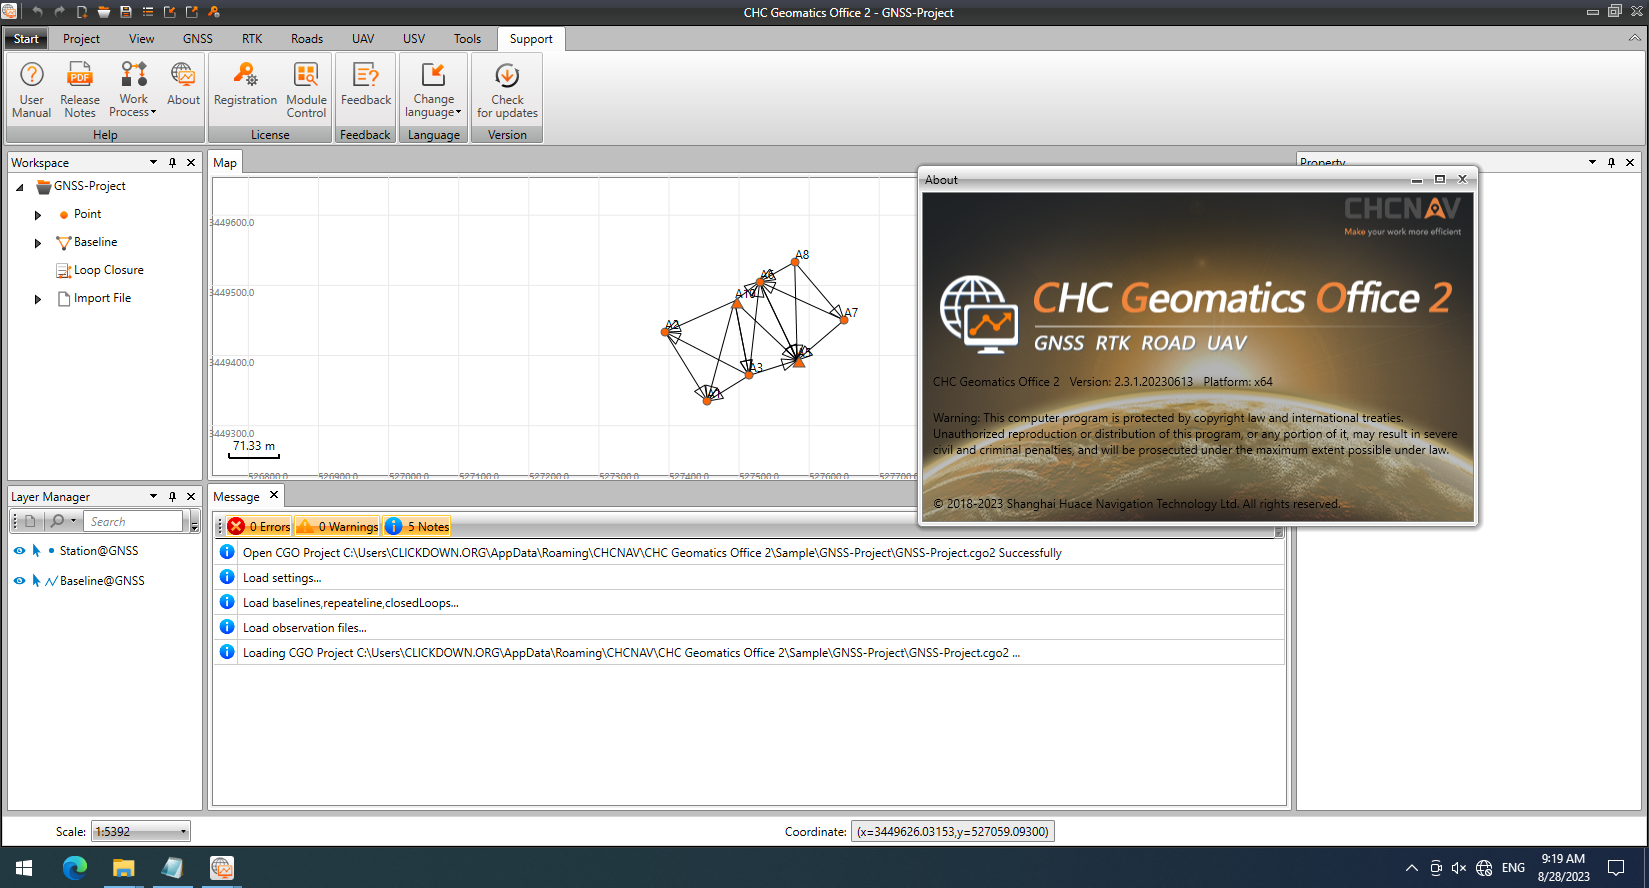 Working with CHC Geomatics Office 2 v2.3.1.20230613